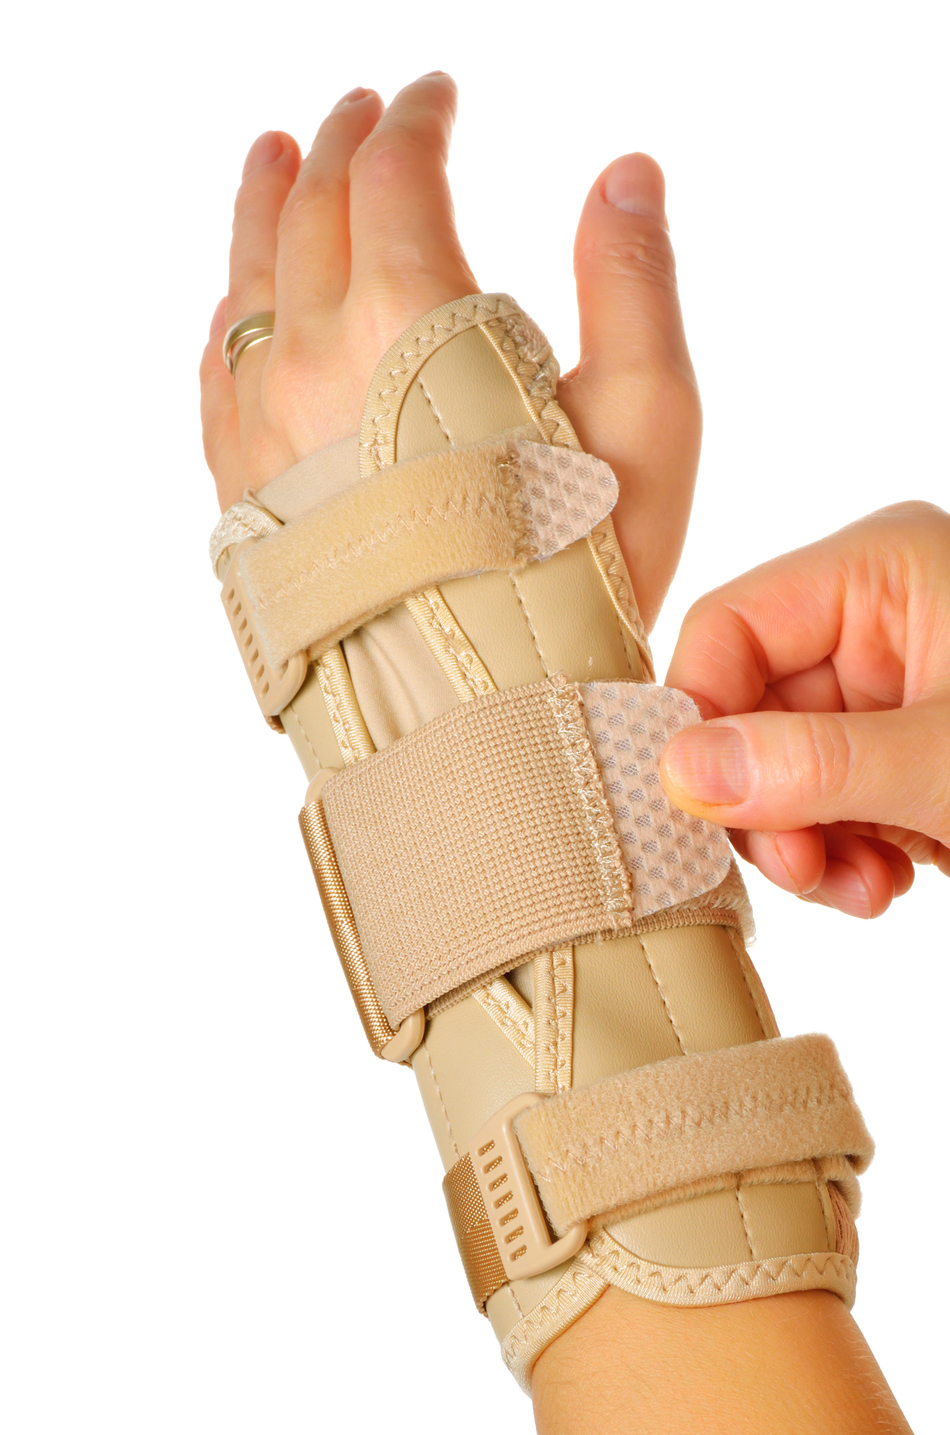 Treating Carpal Tunnel Without Surgery